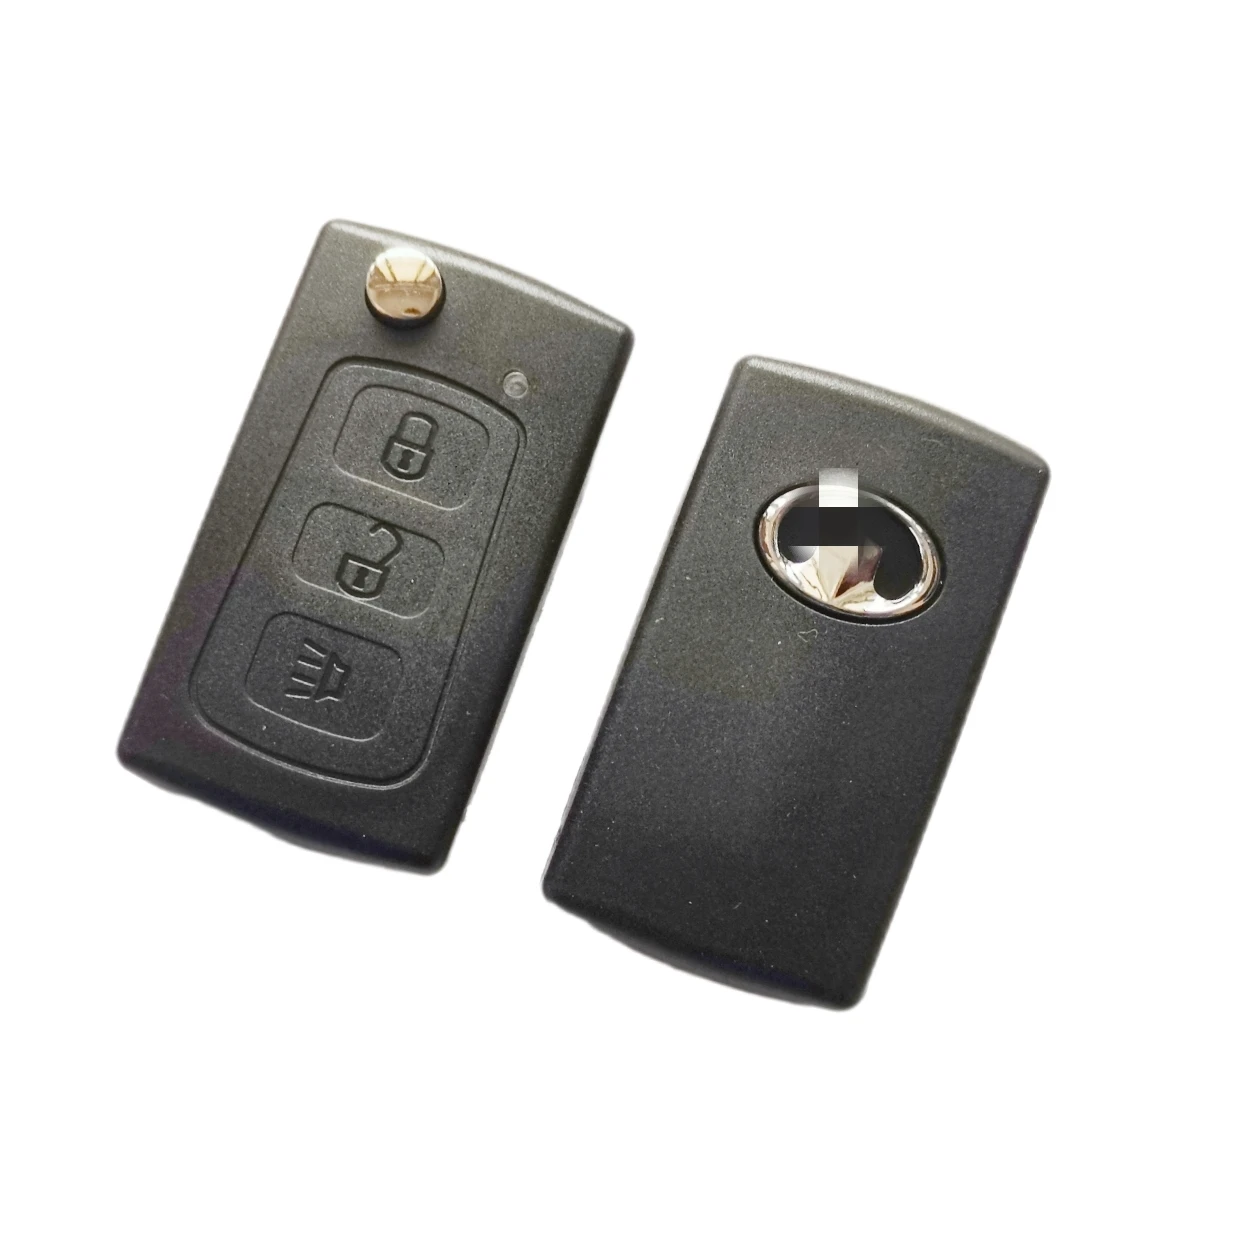 With Logo 3 Buttons Replacement Flip Folding Remote Key Case Shell For Great Wall Hover Haval H3 H5 Keyless Entry Fob Key Cover